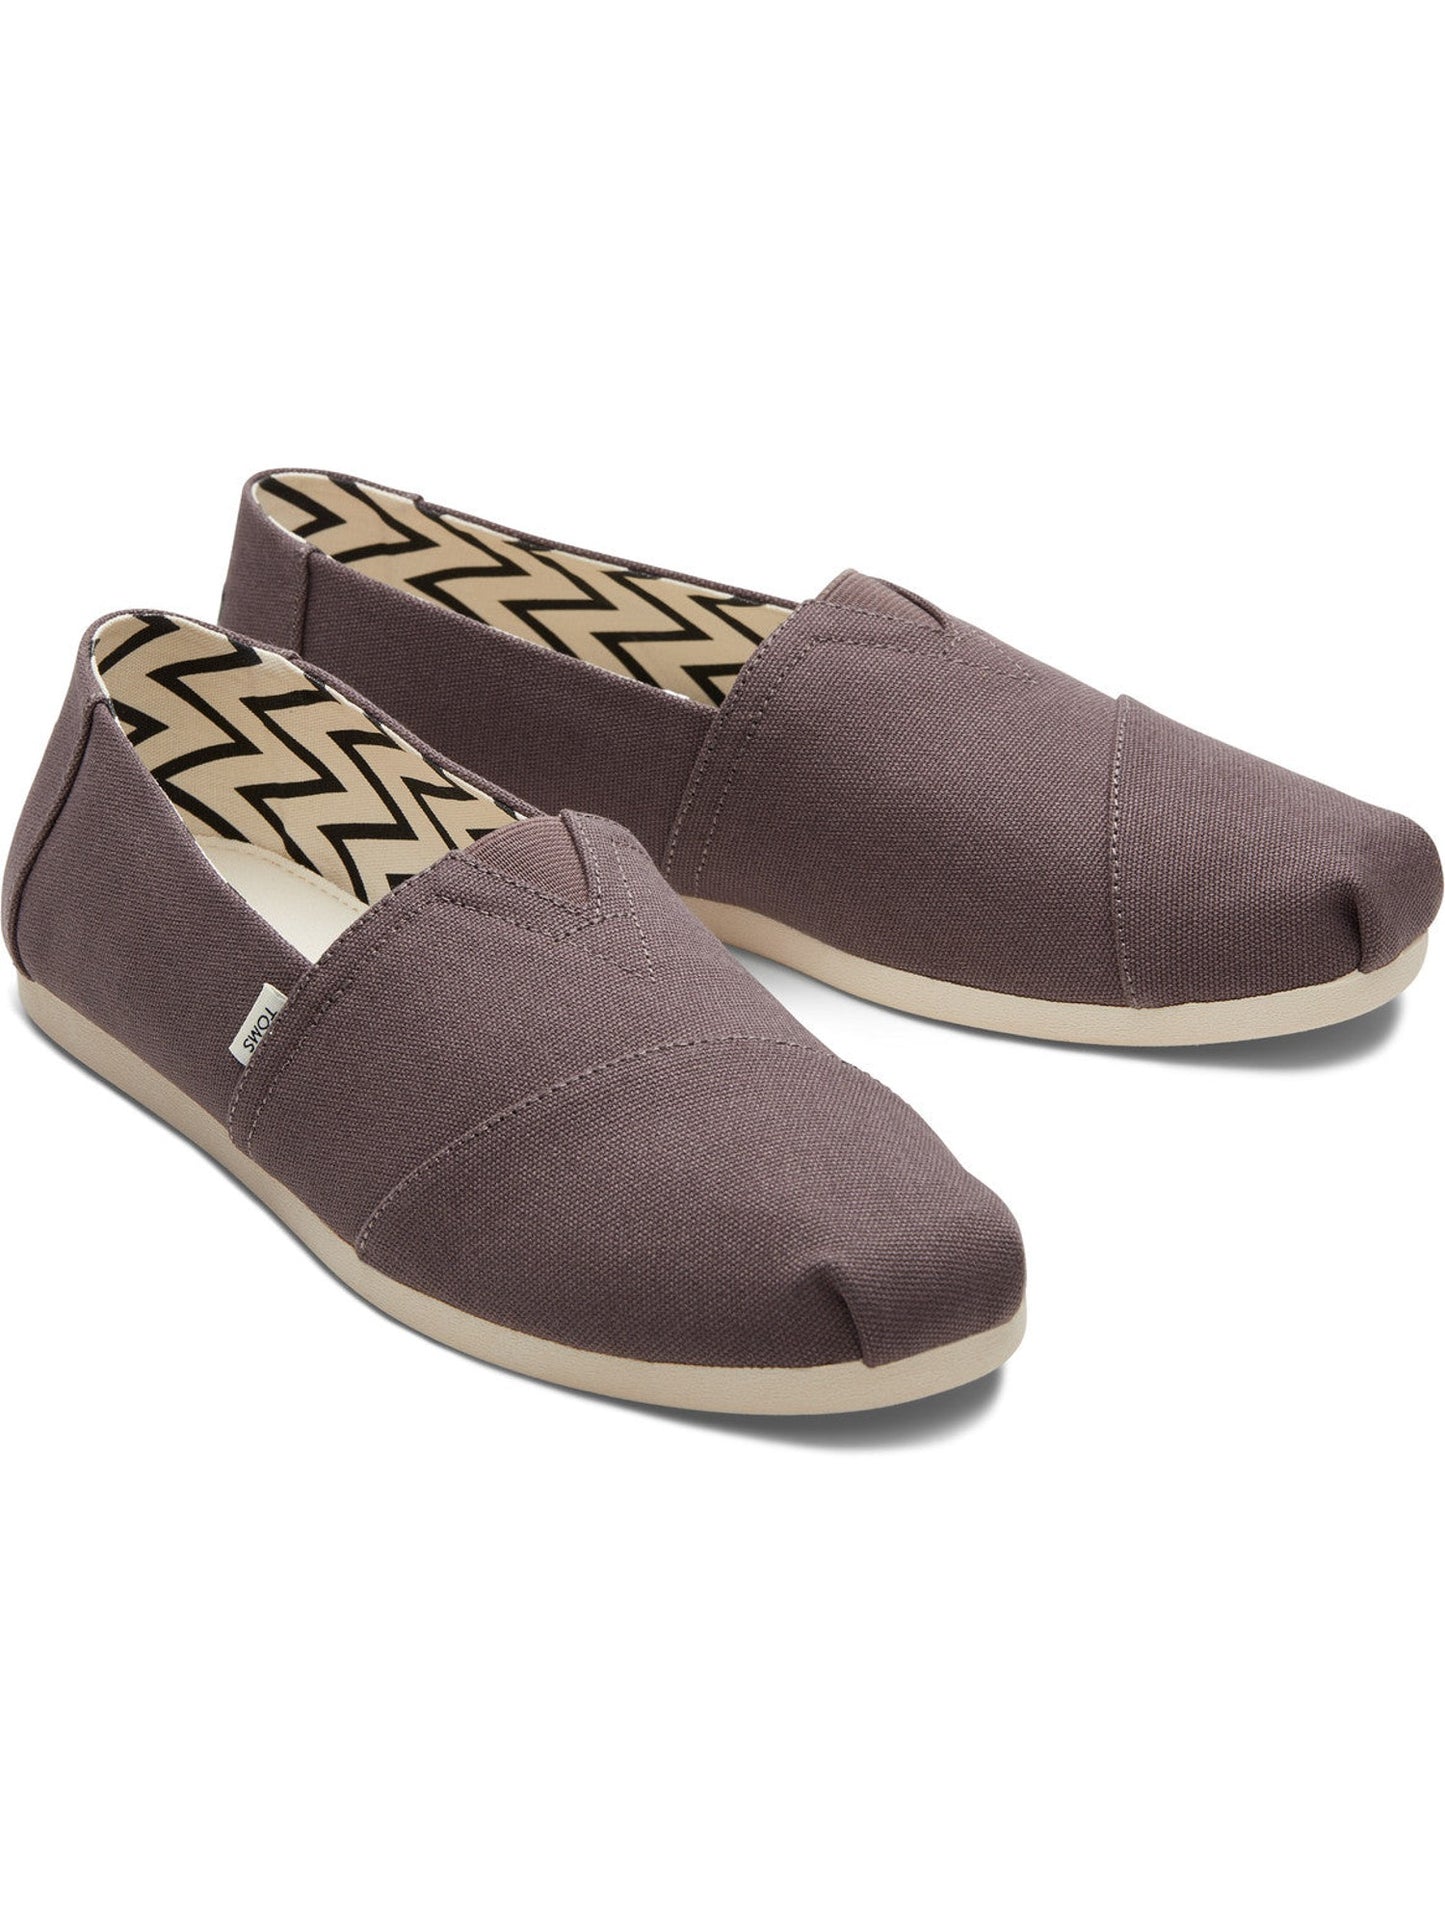 Organic Cotton Canvas Grey Slip Ons-TOMS® India Official Site